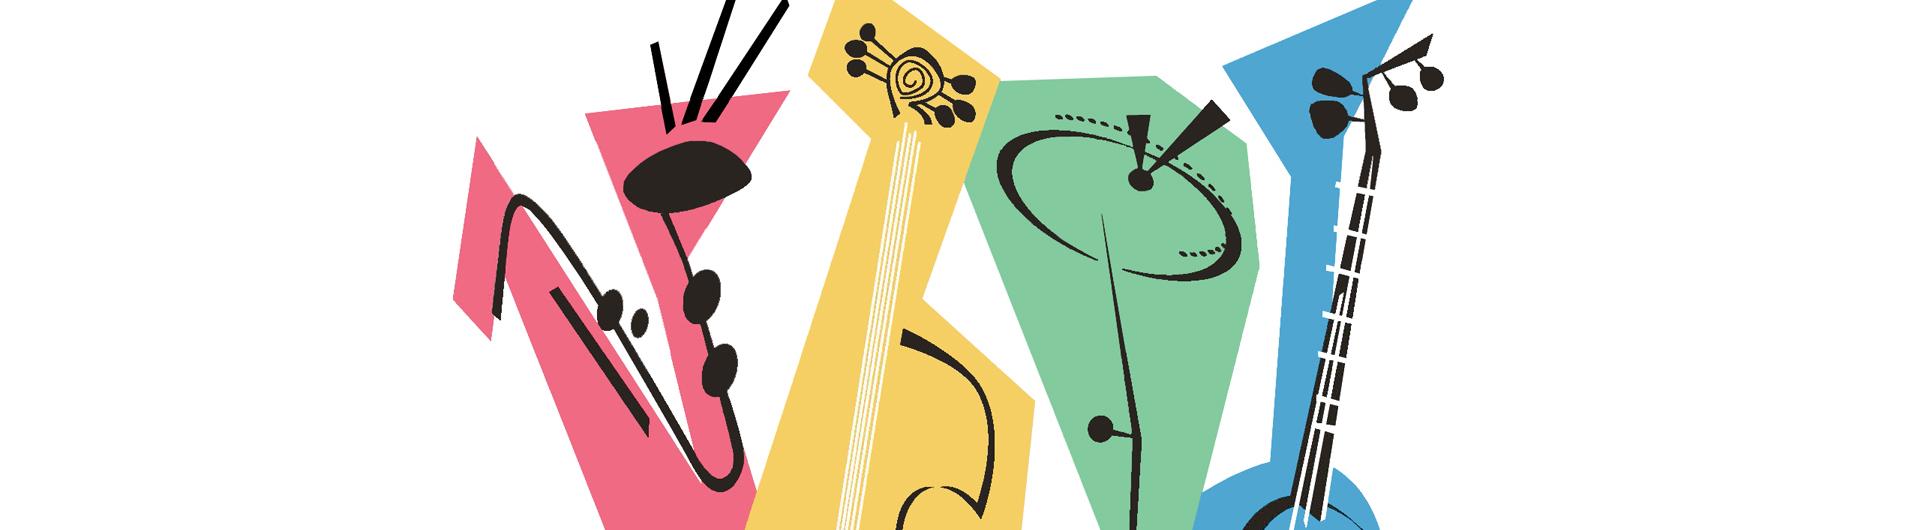 Illustration of different instruments in colorful patterns, 1950s style.